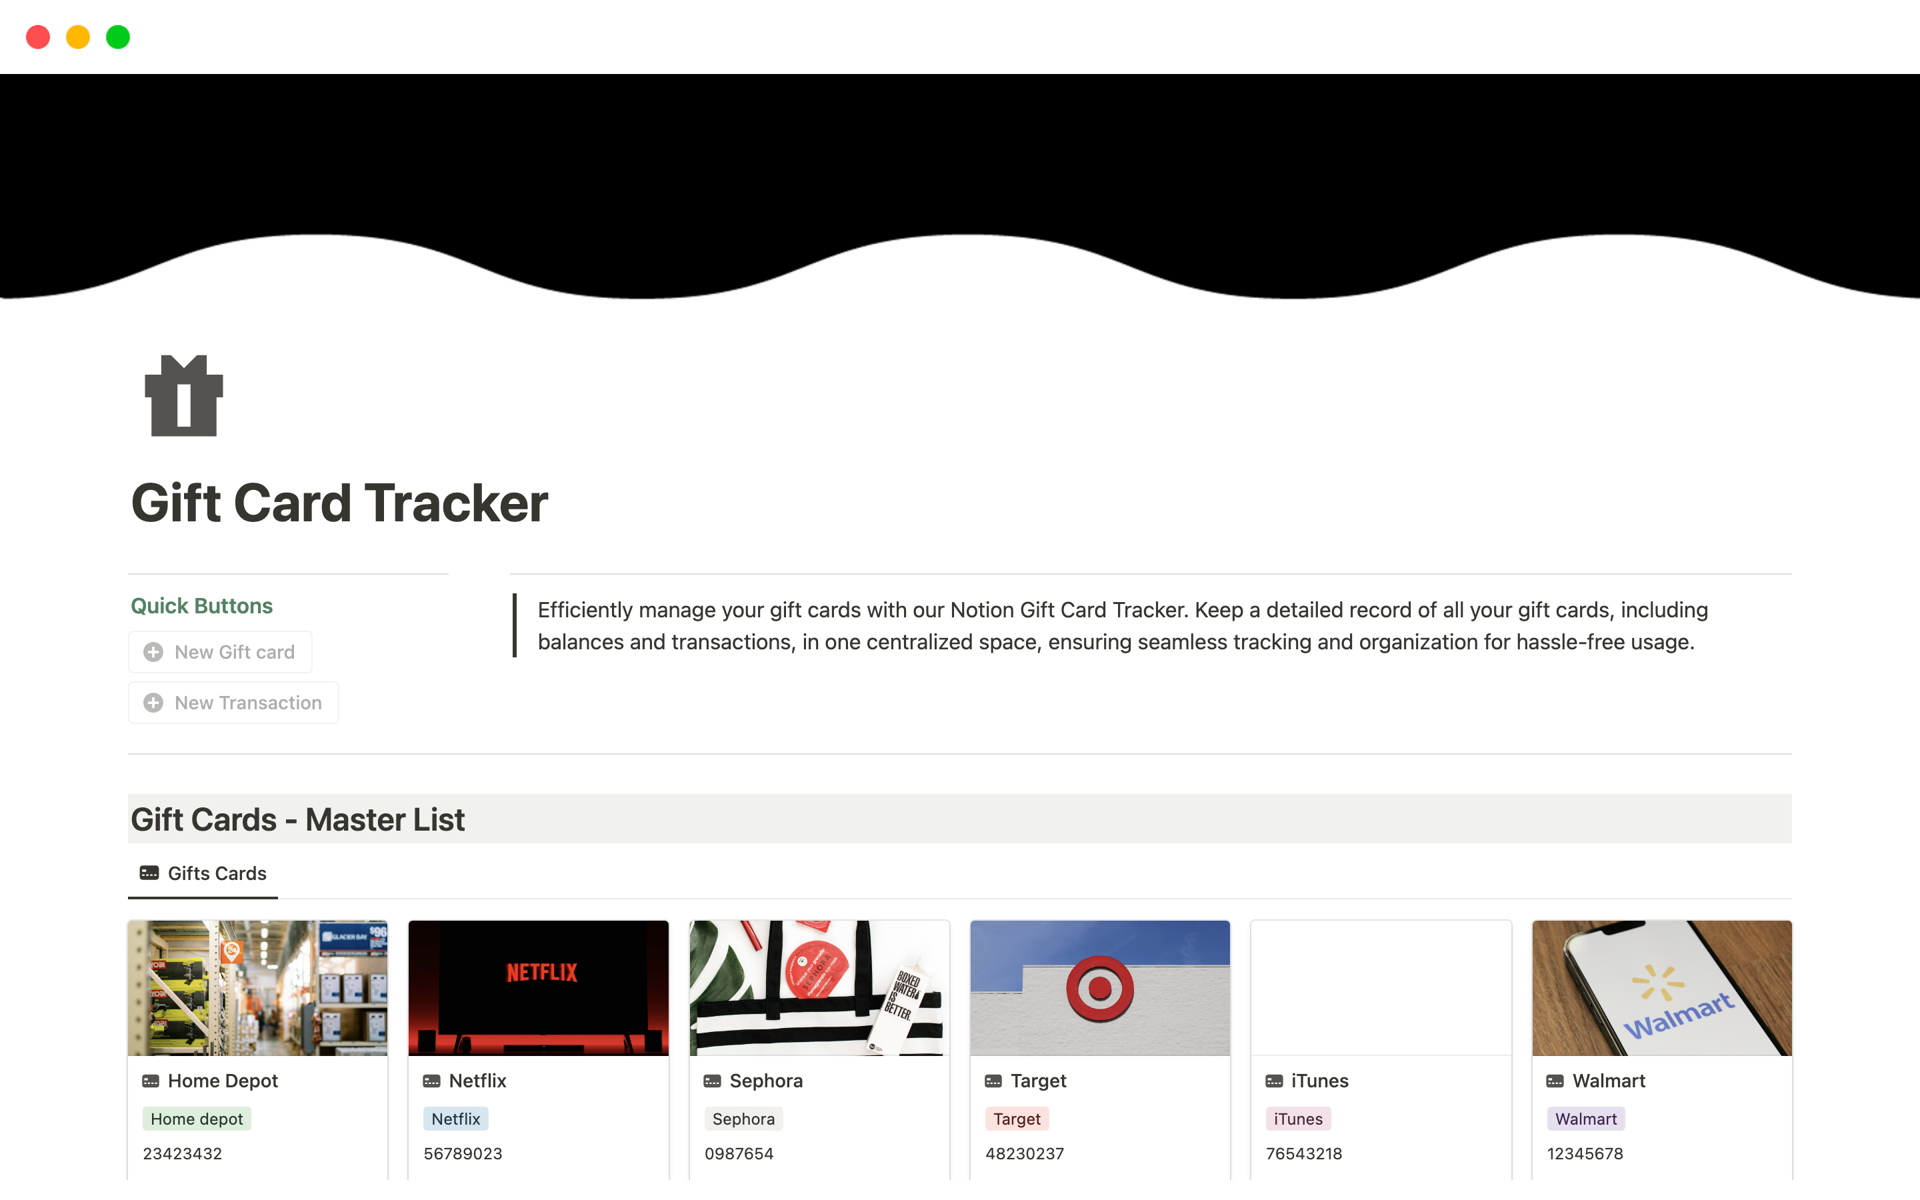 Efficiently manage your gift cards with our Notion Gift Card Tracker.